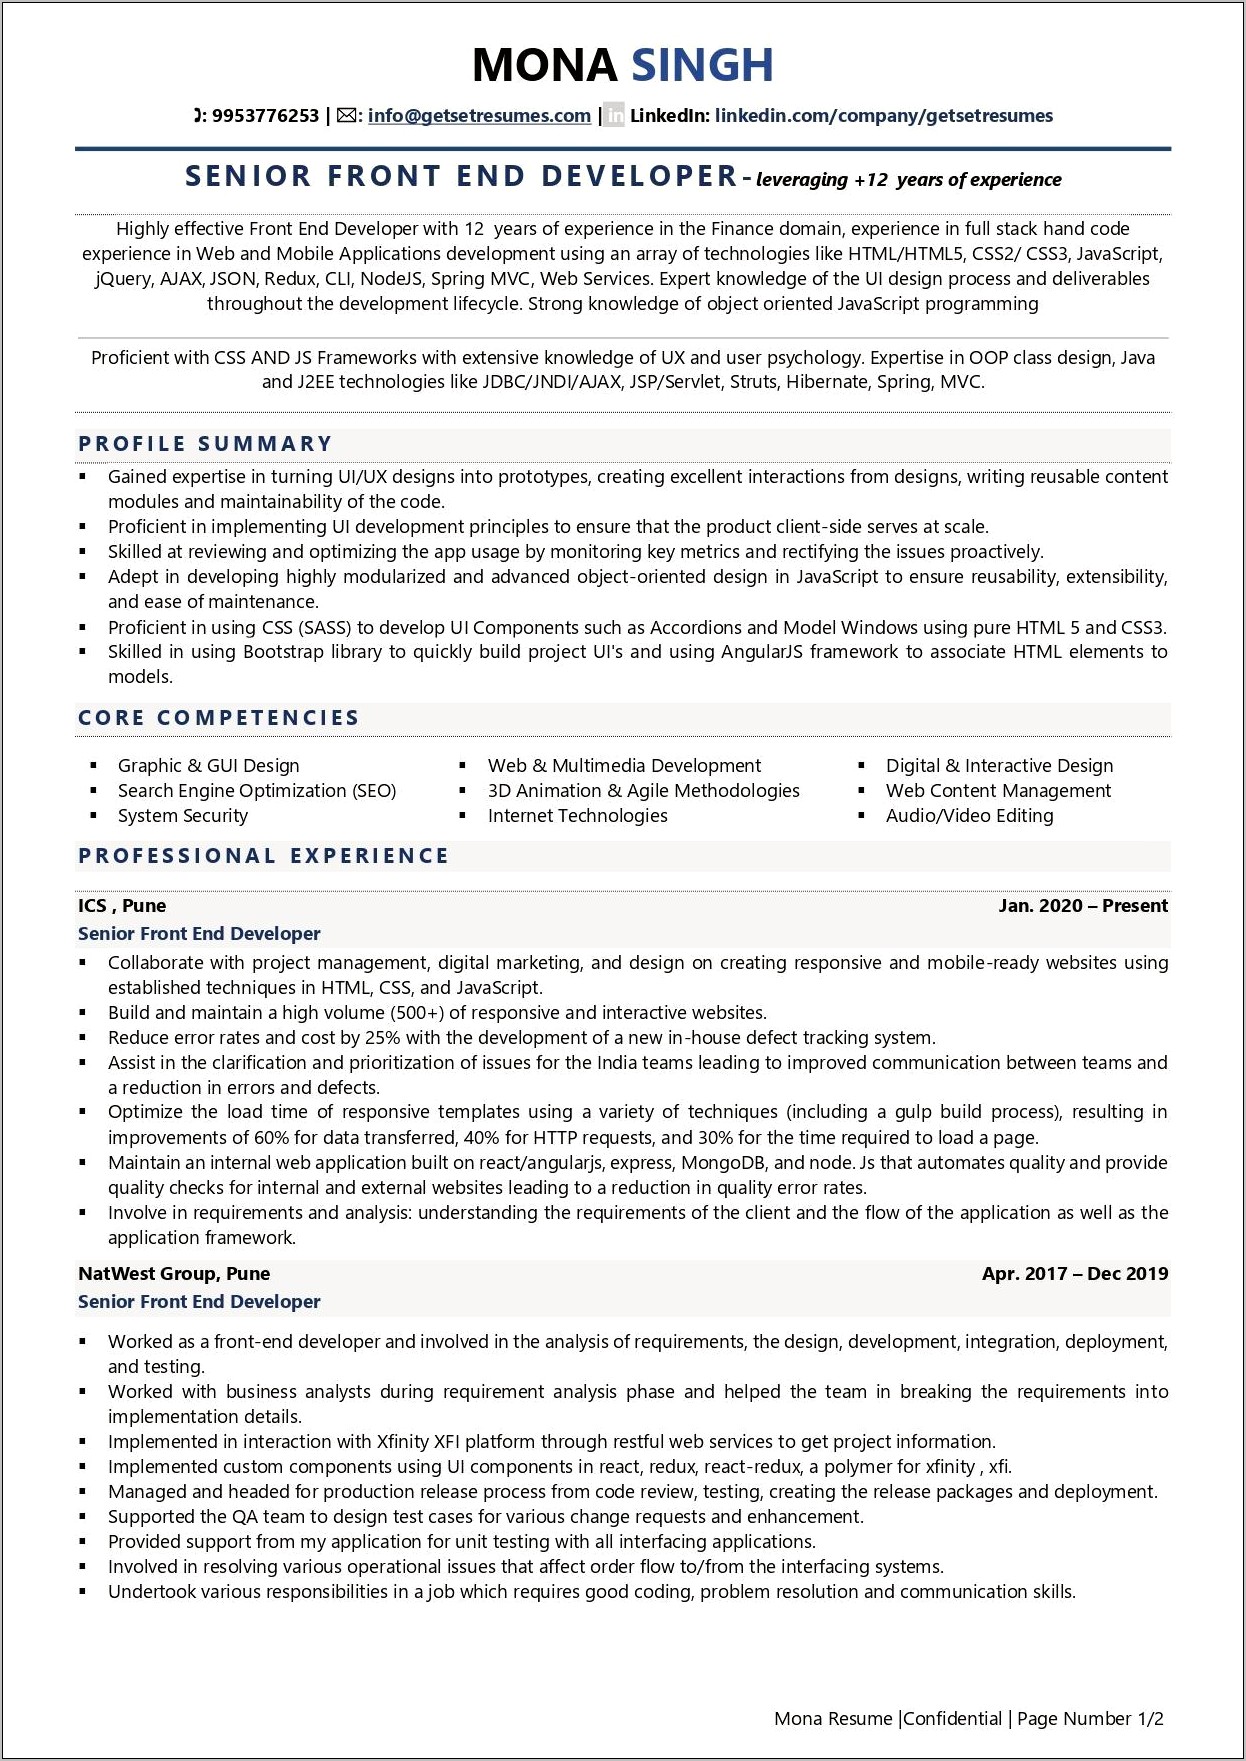 Resume Example In Html Code